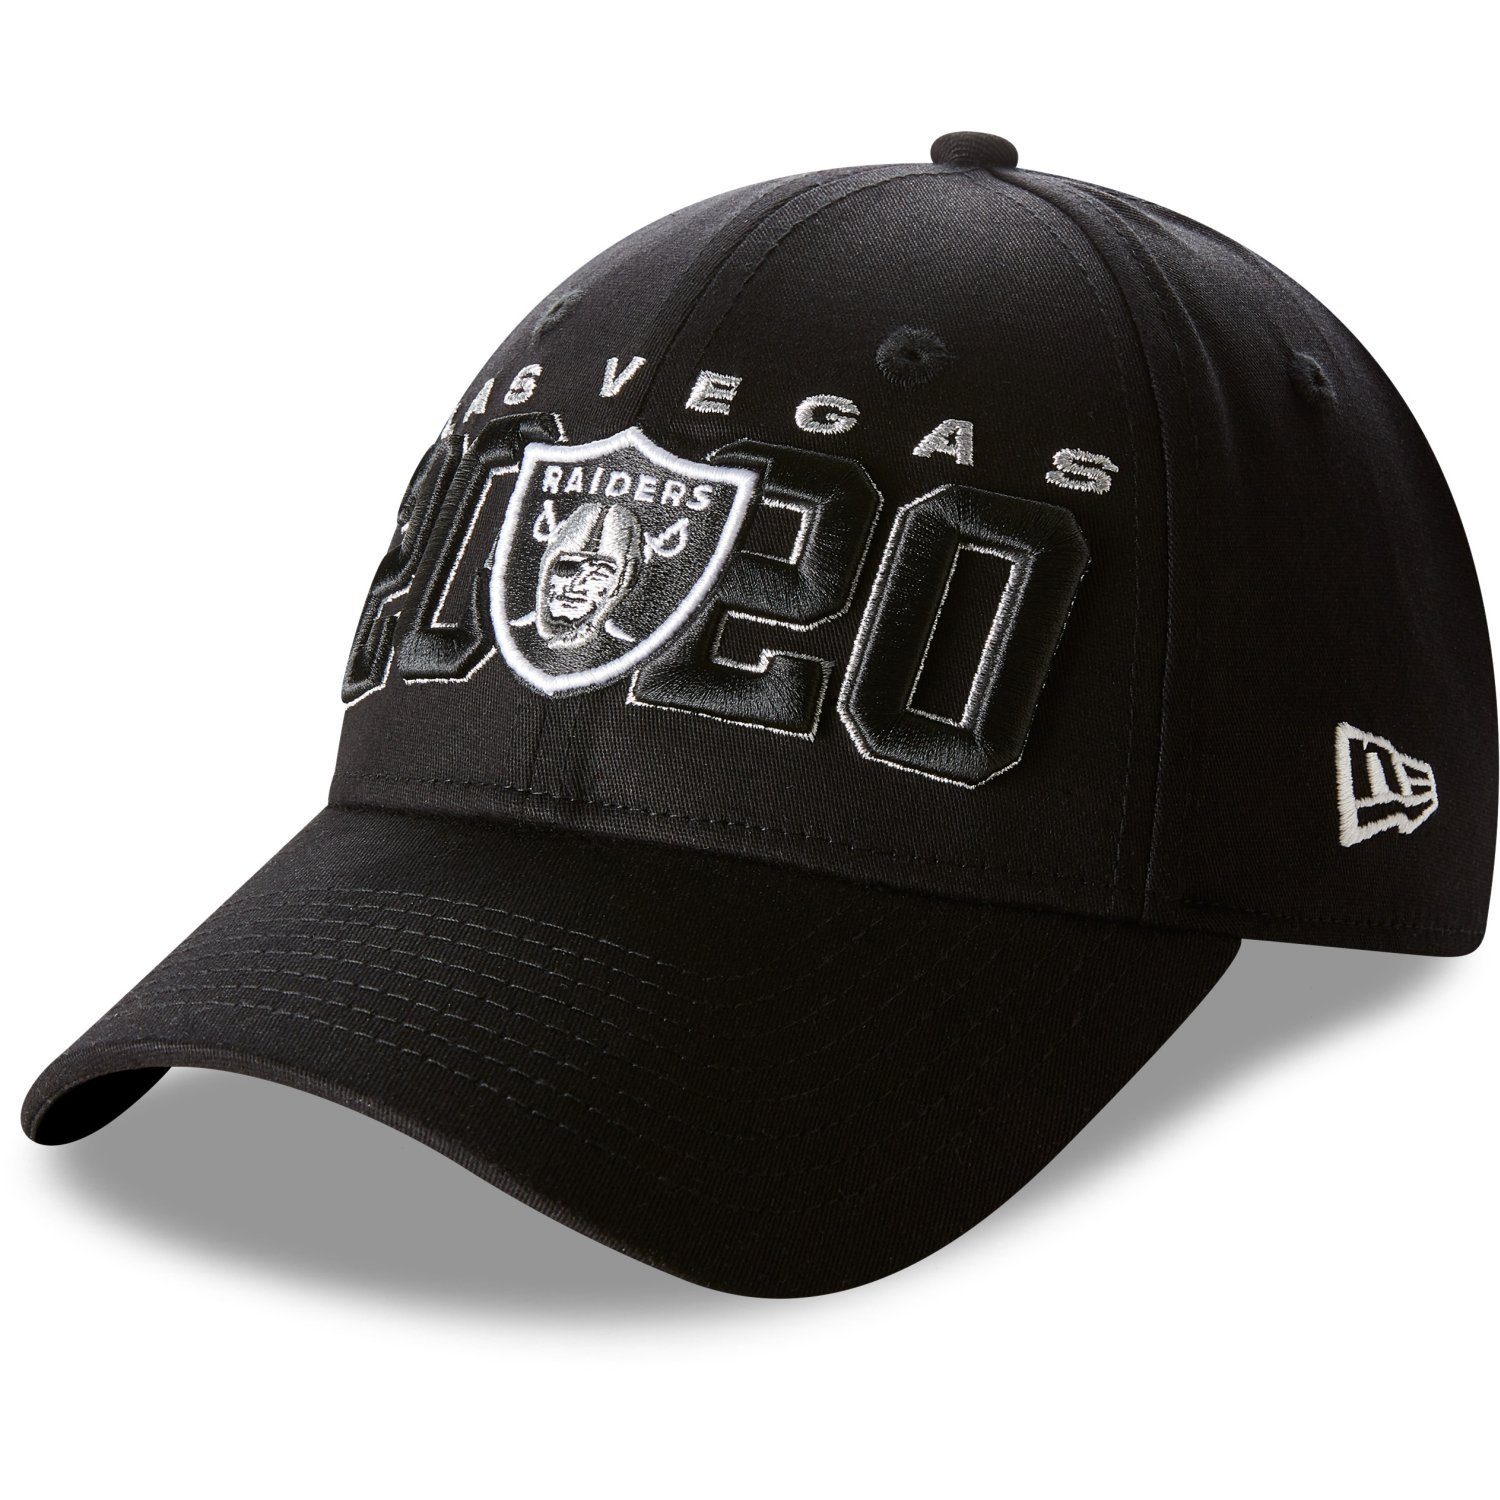 New Era Fitted Cap Stretch Raiders 9FORTY DRAFT Las Vegas 2020